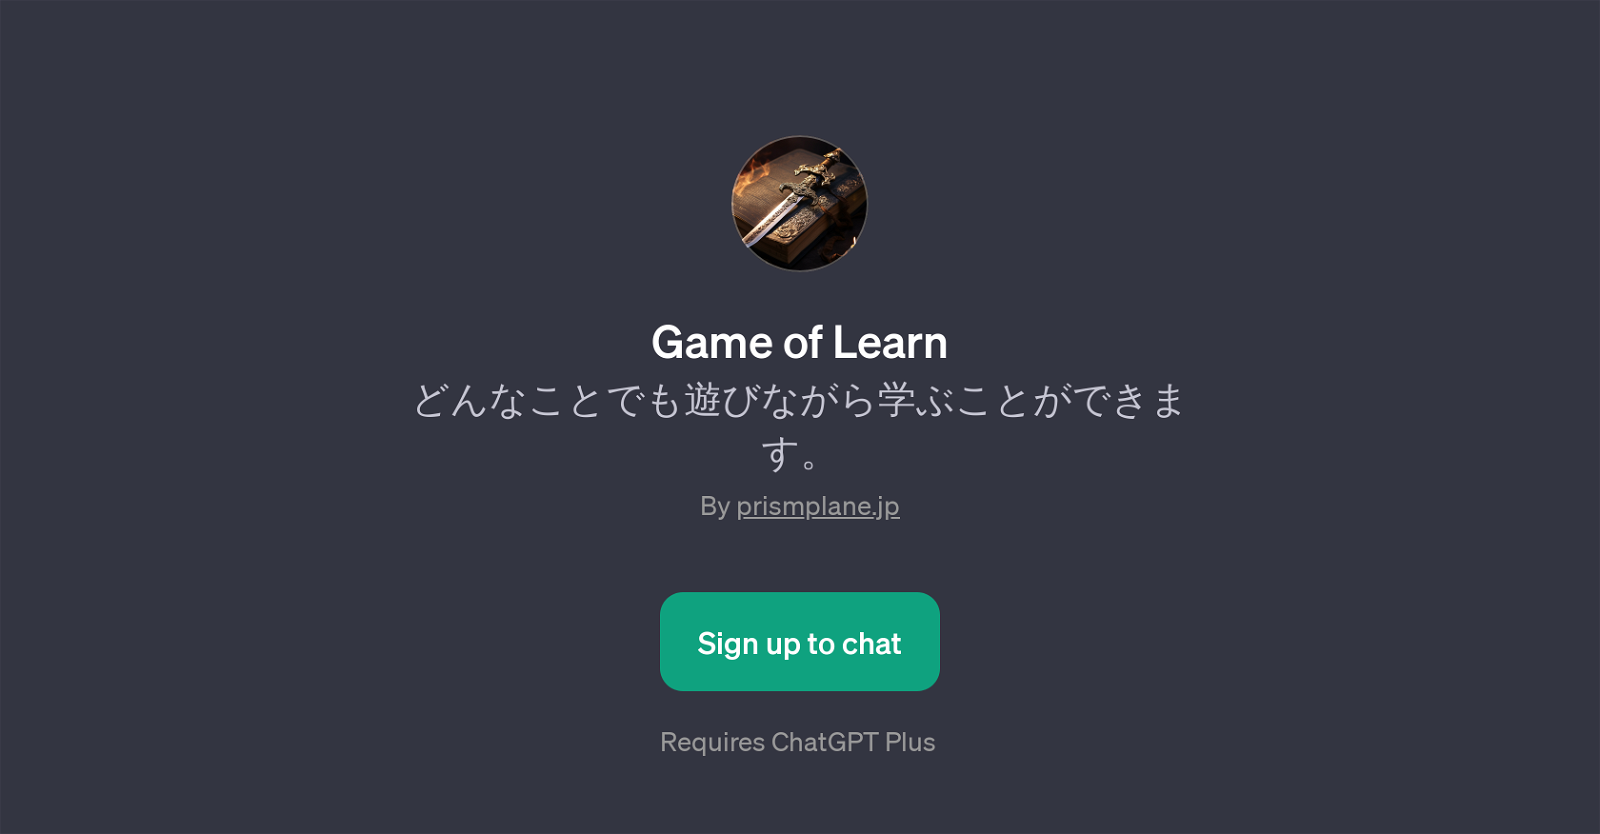 Game of Learn website